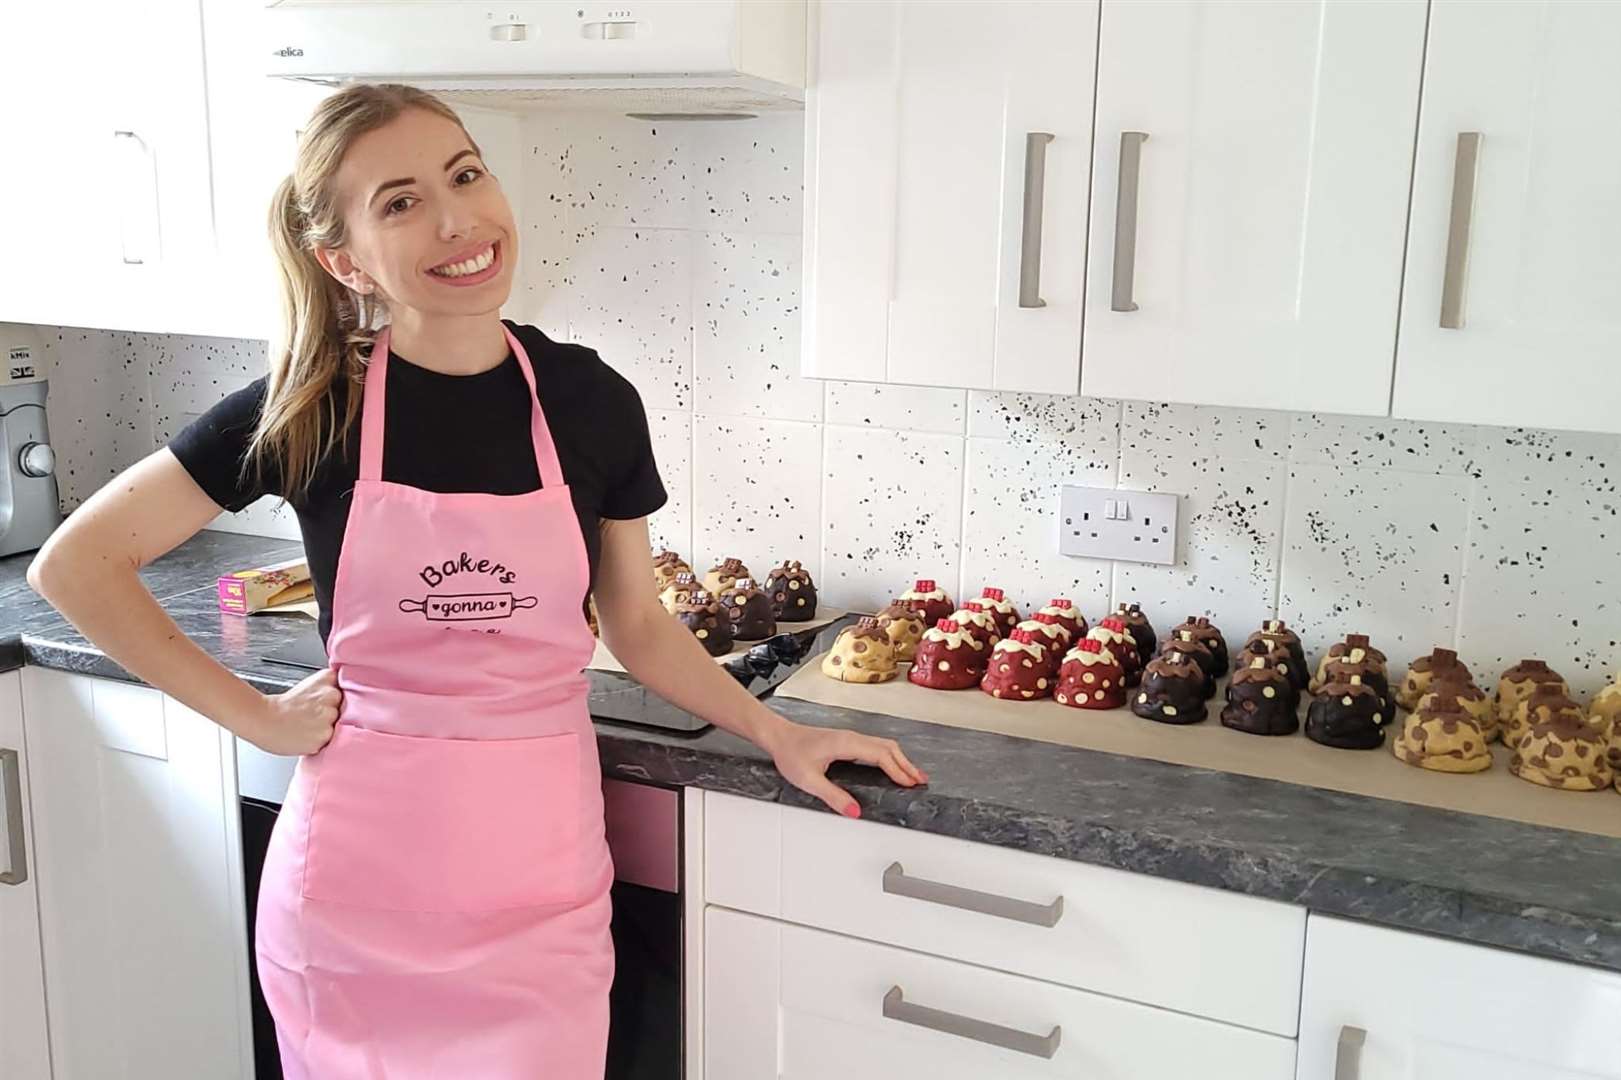 Katie Lester bakes all her cookies from her kitchen at home